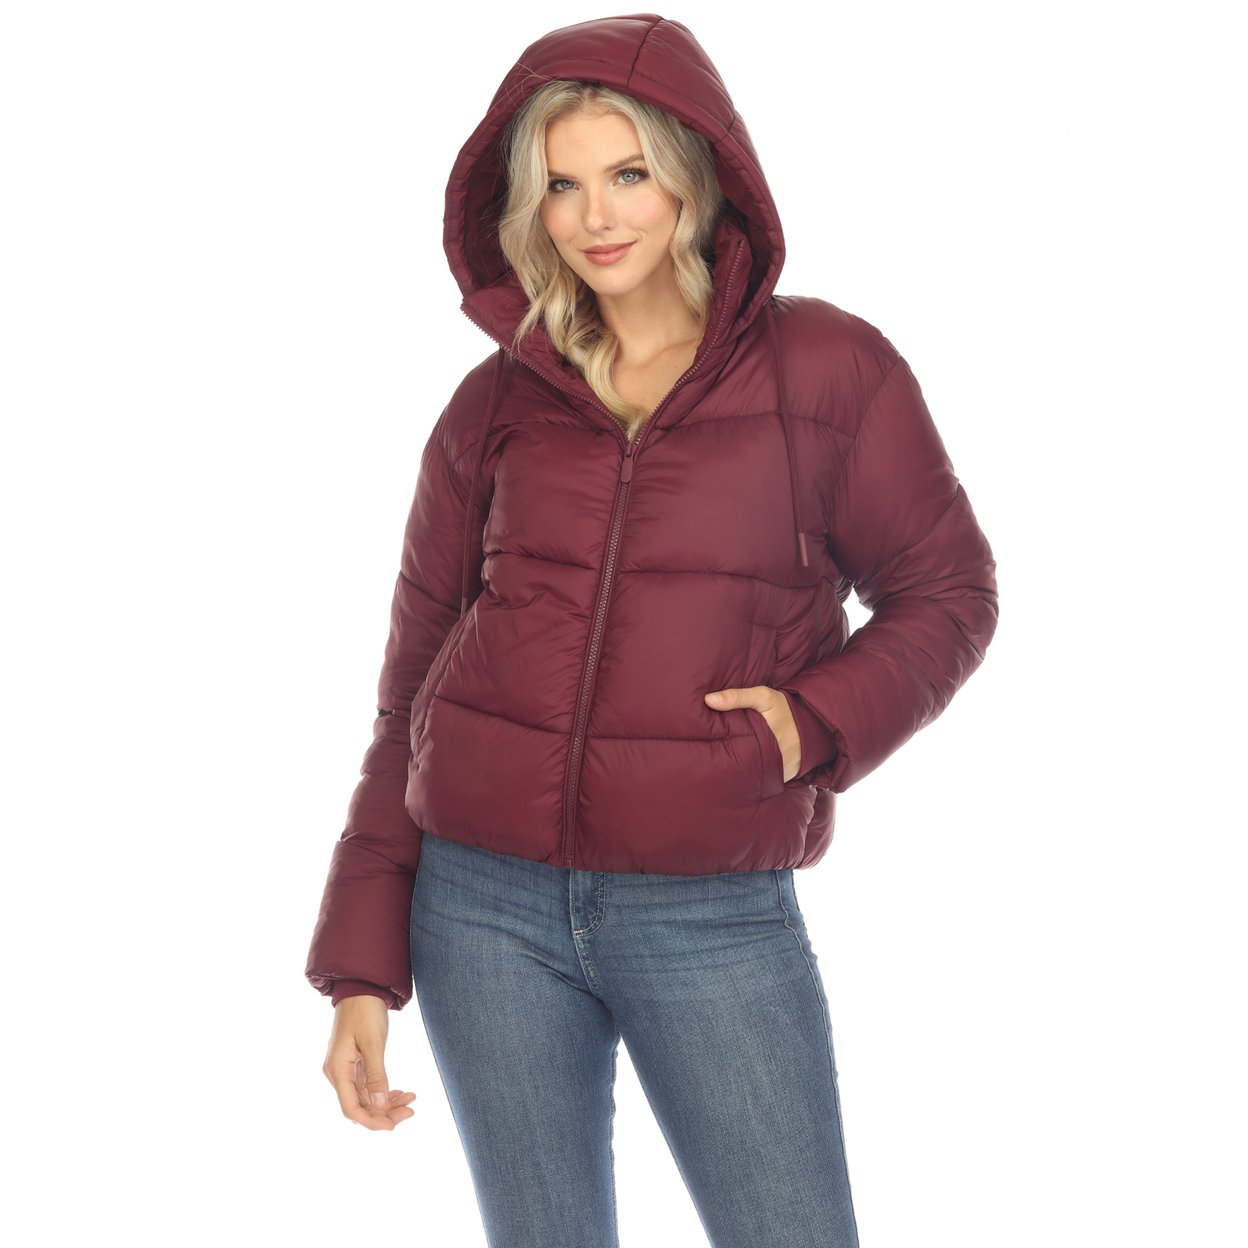 White Mark Women's Zip Hooded Puffer Jacket With Pockets - Burgundy, Small